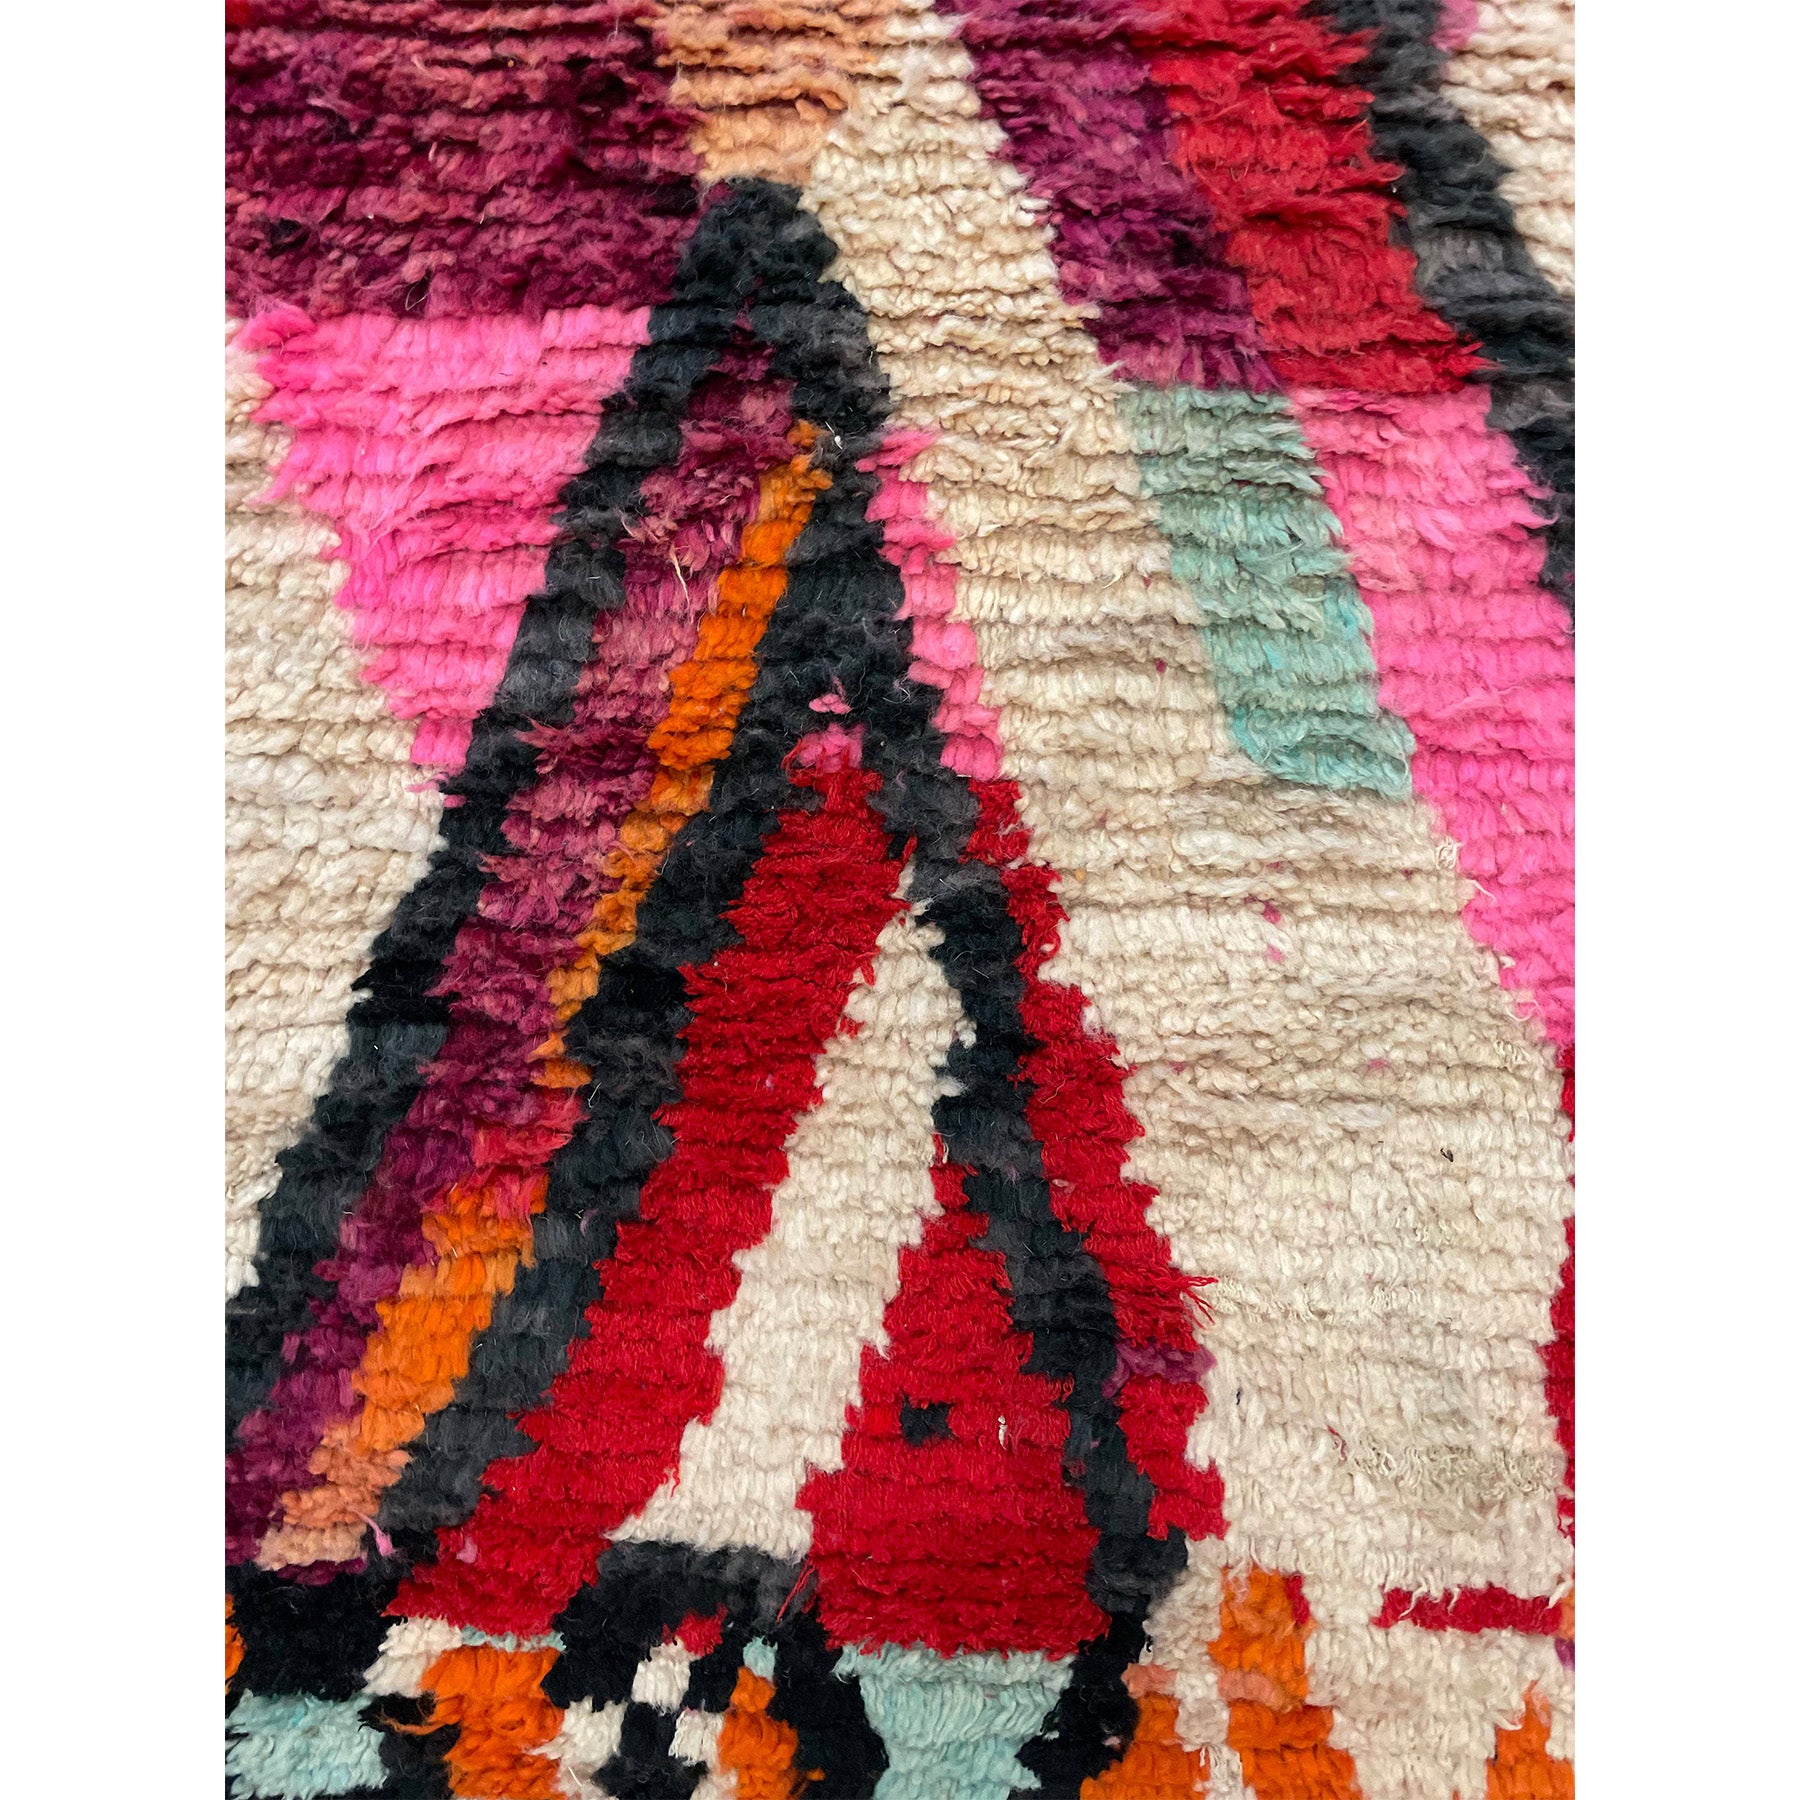 Handwoven wool pile Moroccan runner with colorful details - Kantara | Moroccan Rugs